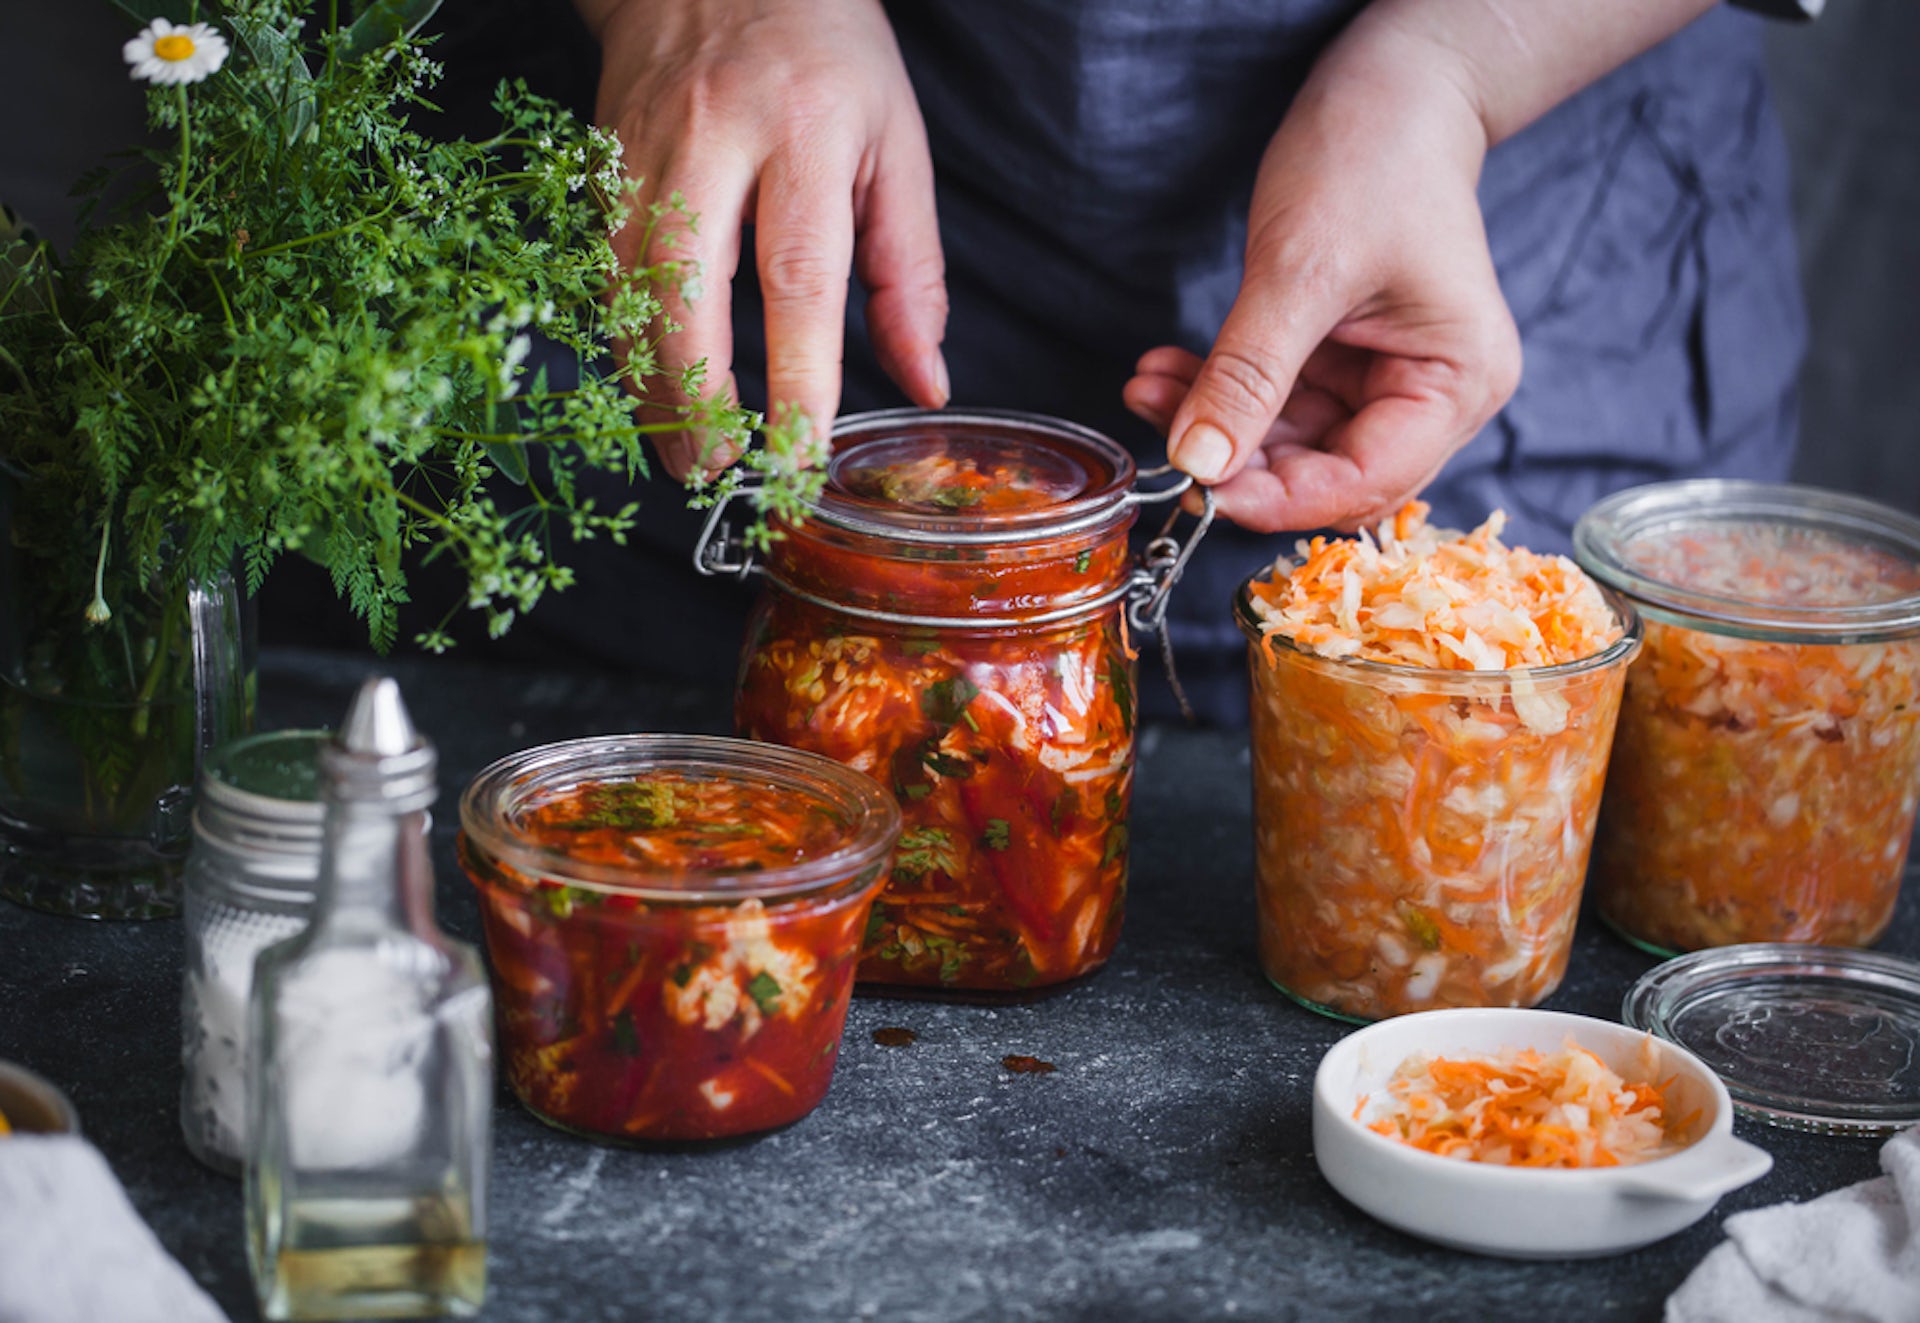 It's About Calories, So Kimchi Is Not A Weight Loss Superfood - But You May Eat Less